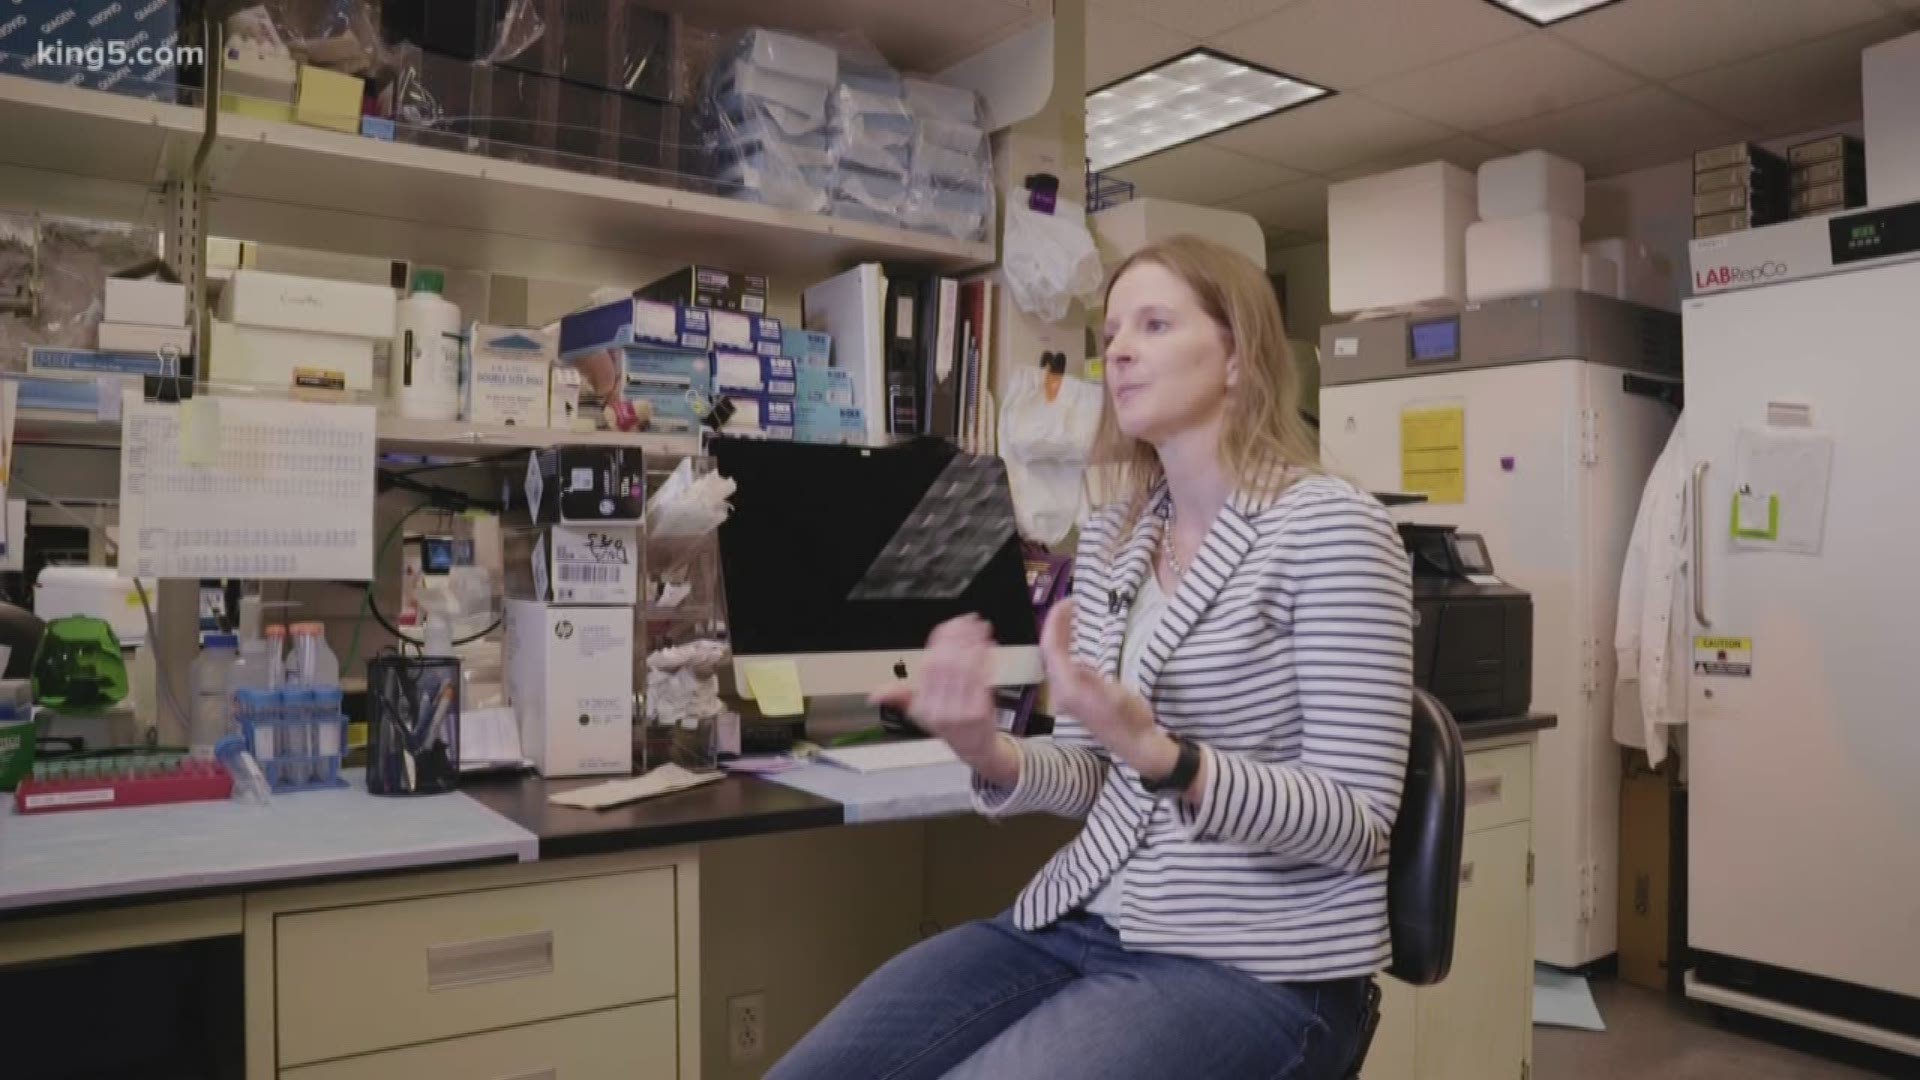 A cancer researcher is a cancer survivor, giving back to the center that helped treat her.